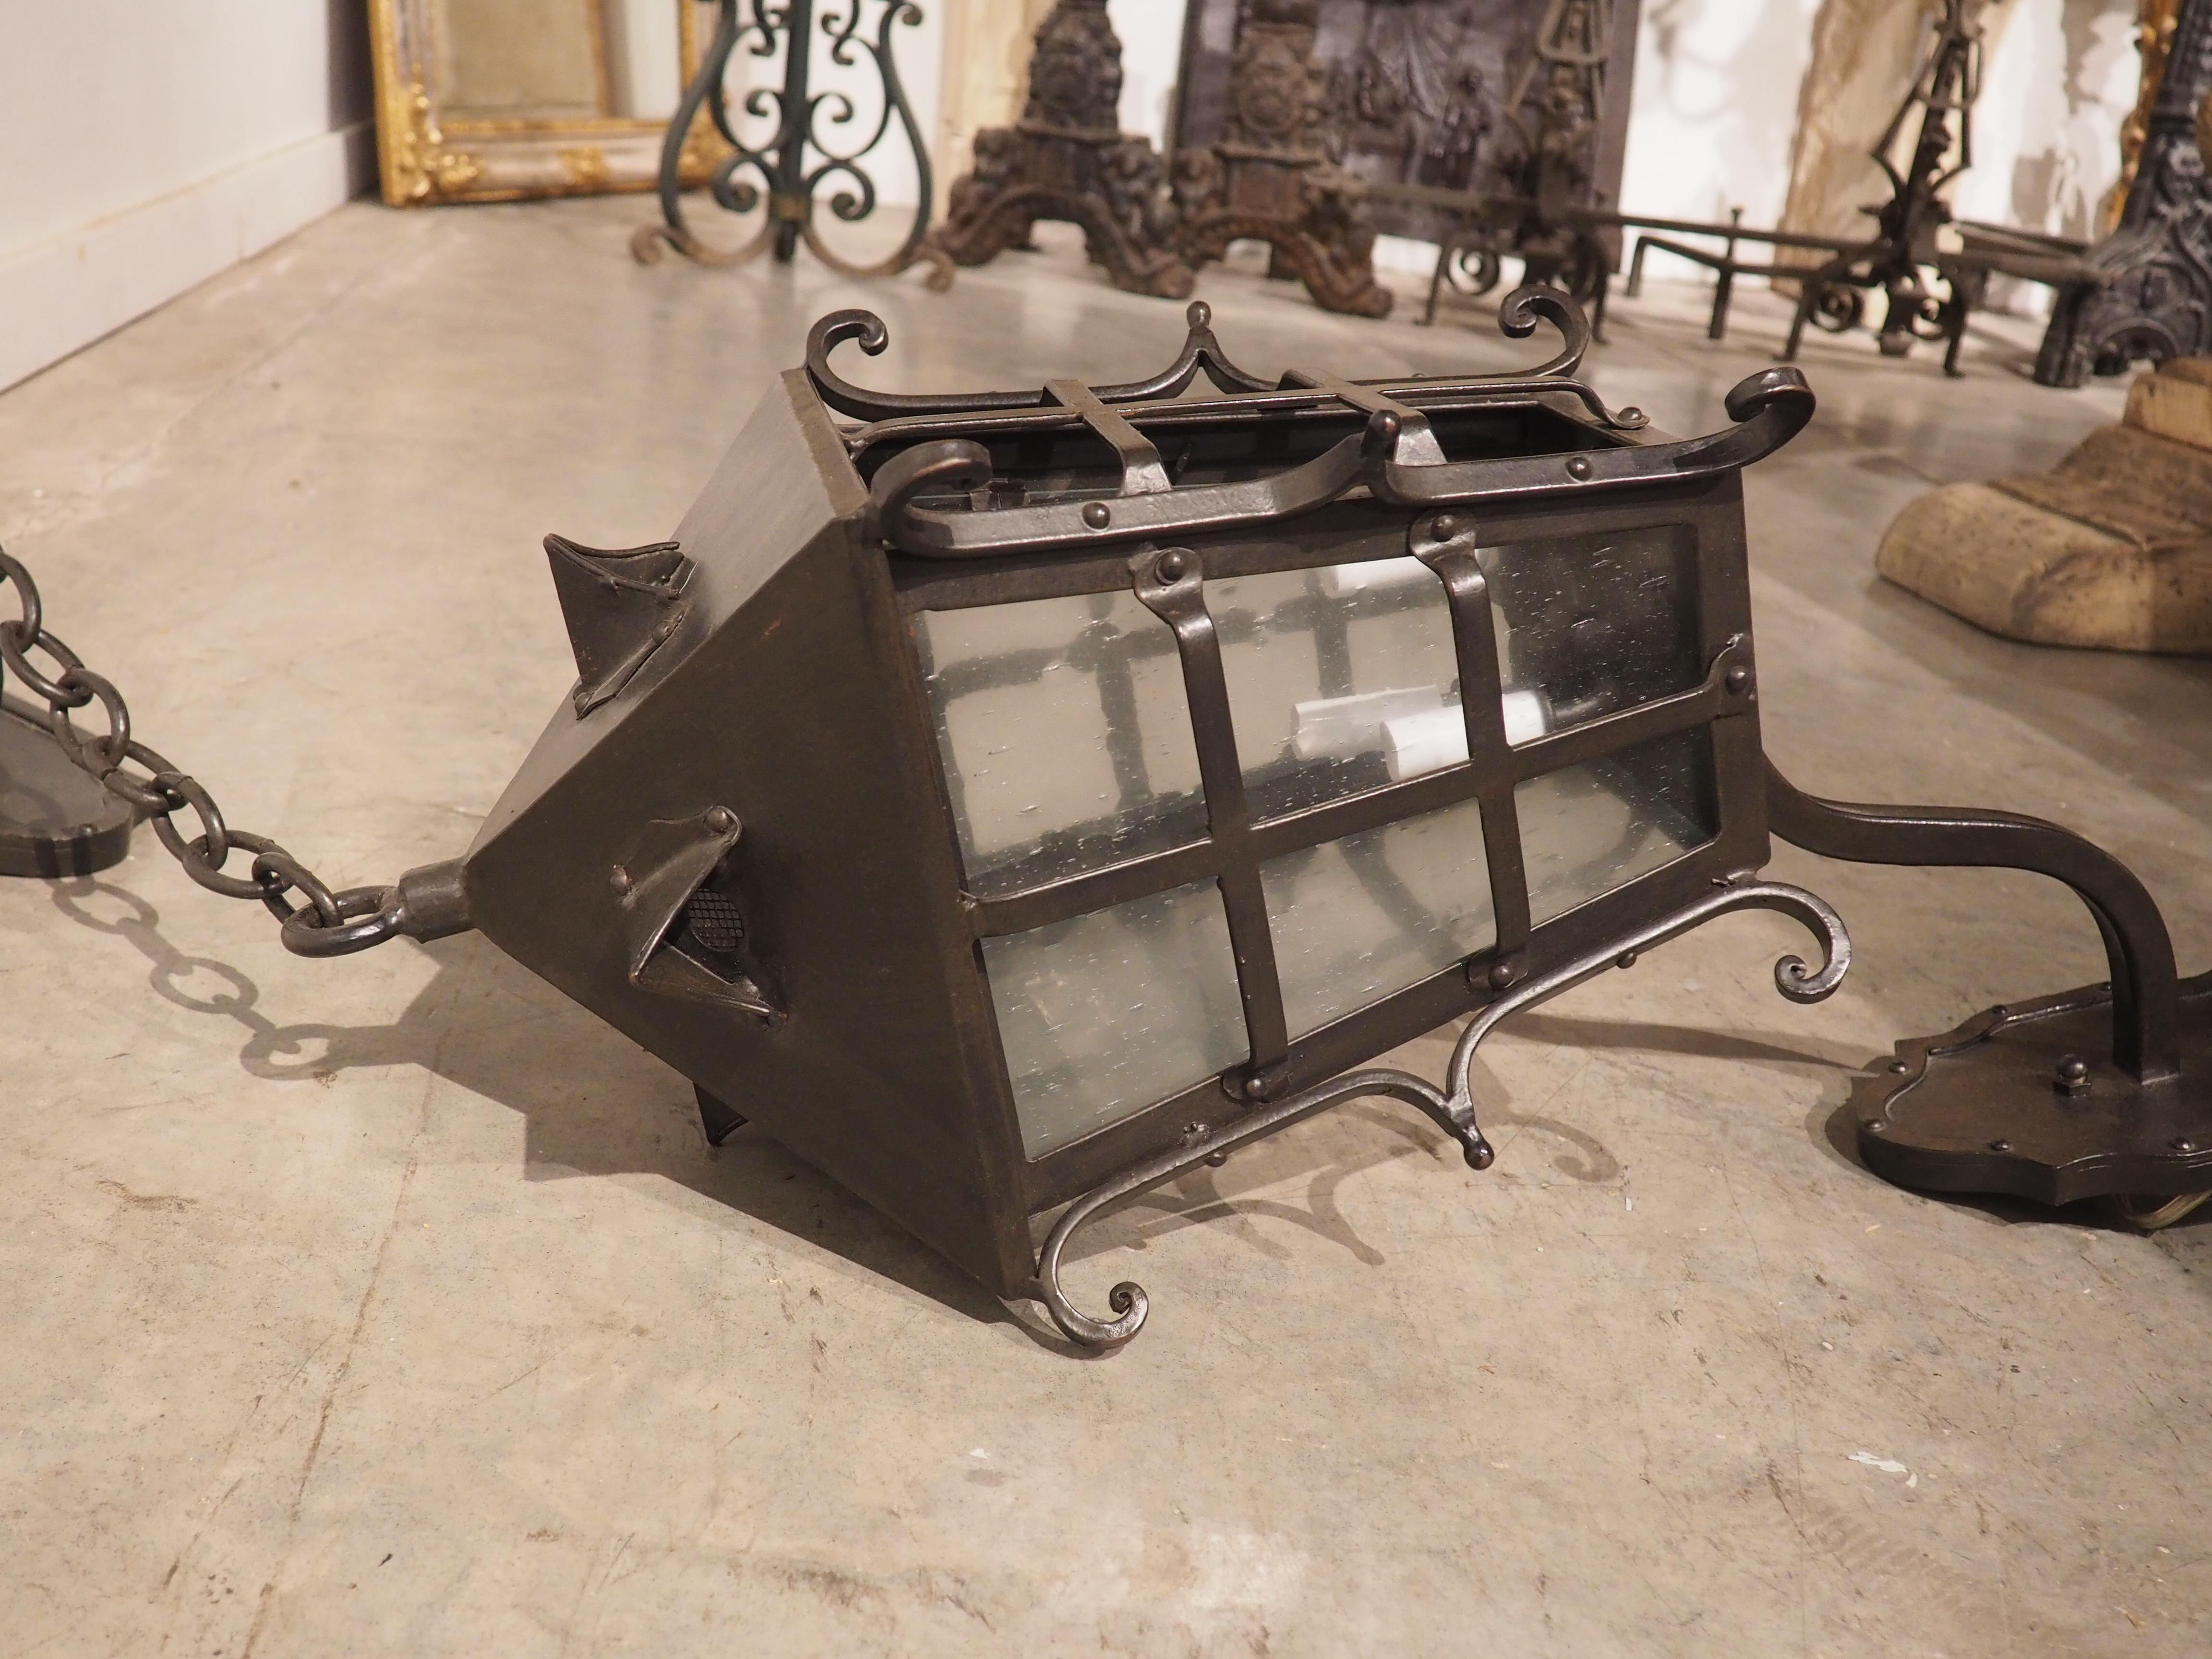 Spanish blacksmiths of the Renaissance period were known for their elaborate pieces that typically featured scrolled elements and imaginative crests. This wrought iron lantern with chained wall mount is reminiscent of such antique Spanish work. The